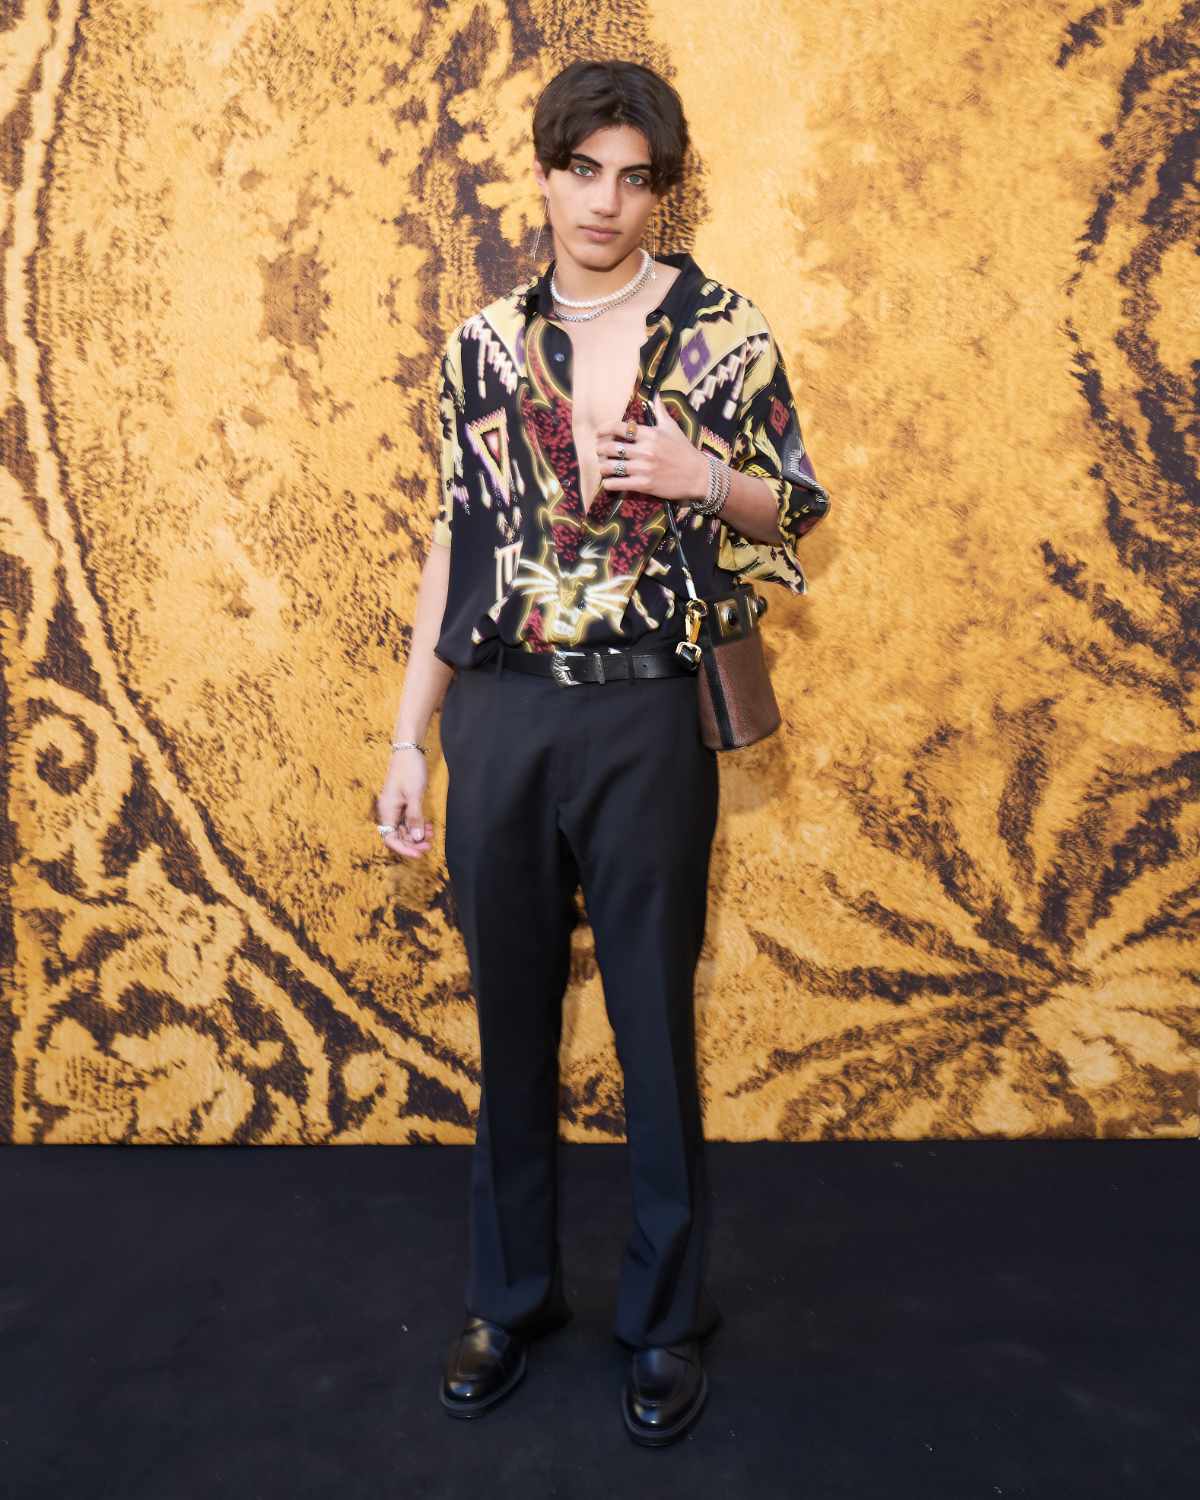 Etro Women's Fall Winter 2022/23 Collection: Show Guests